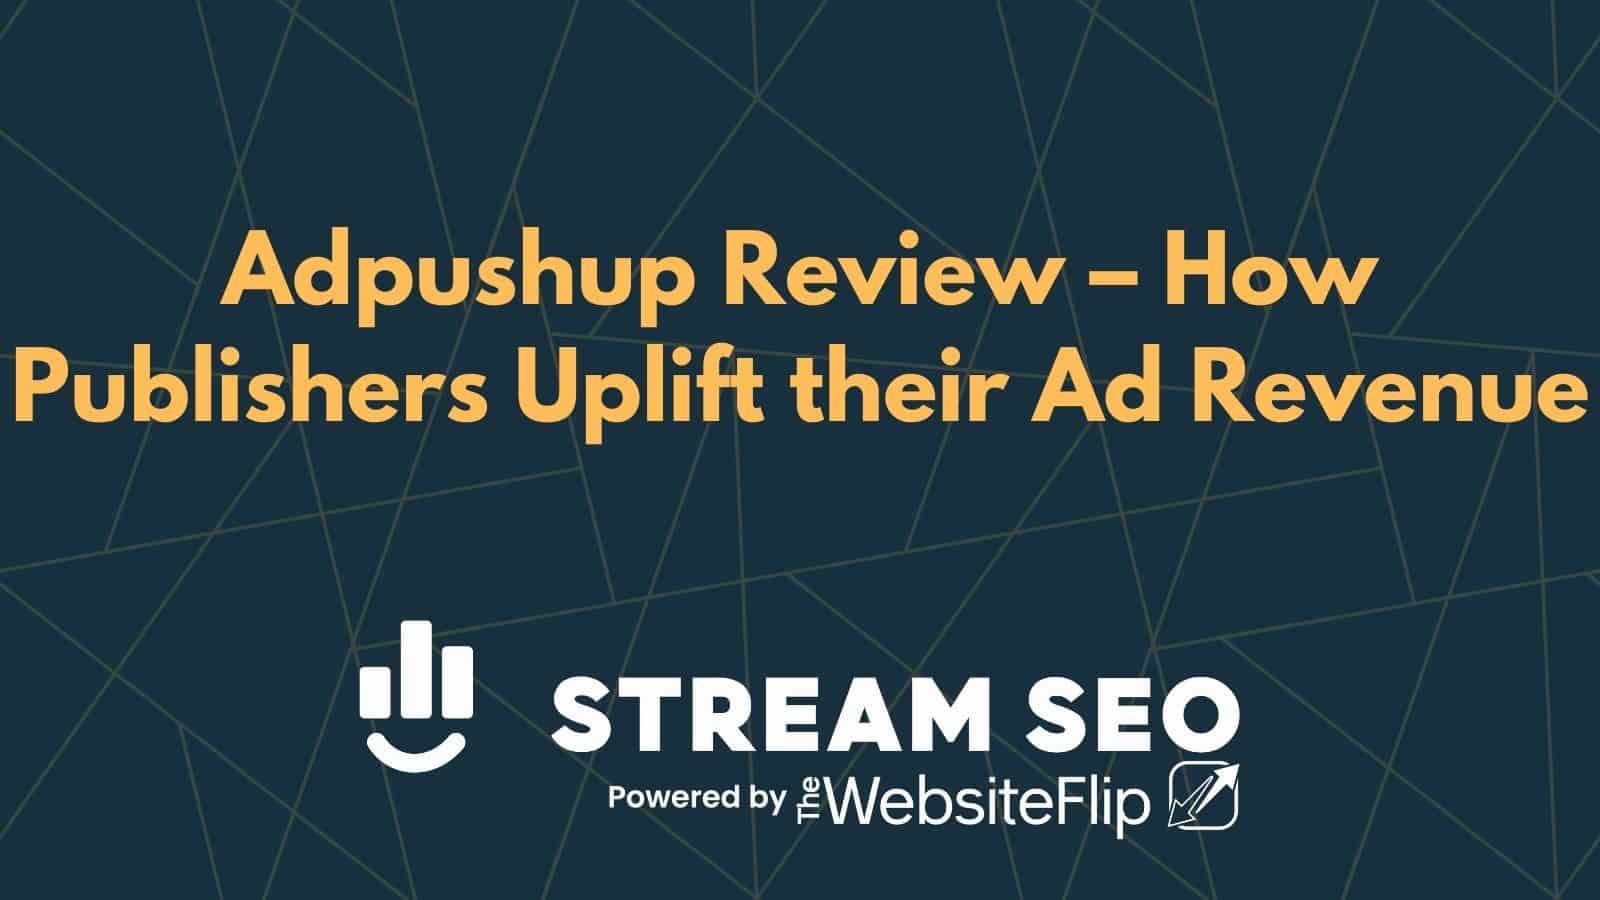 Adpushup Review – How Publishers Uplift their Ad Revenue